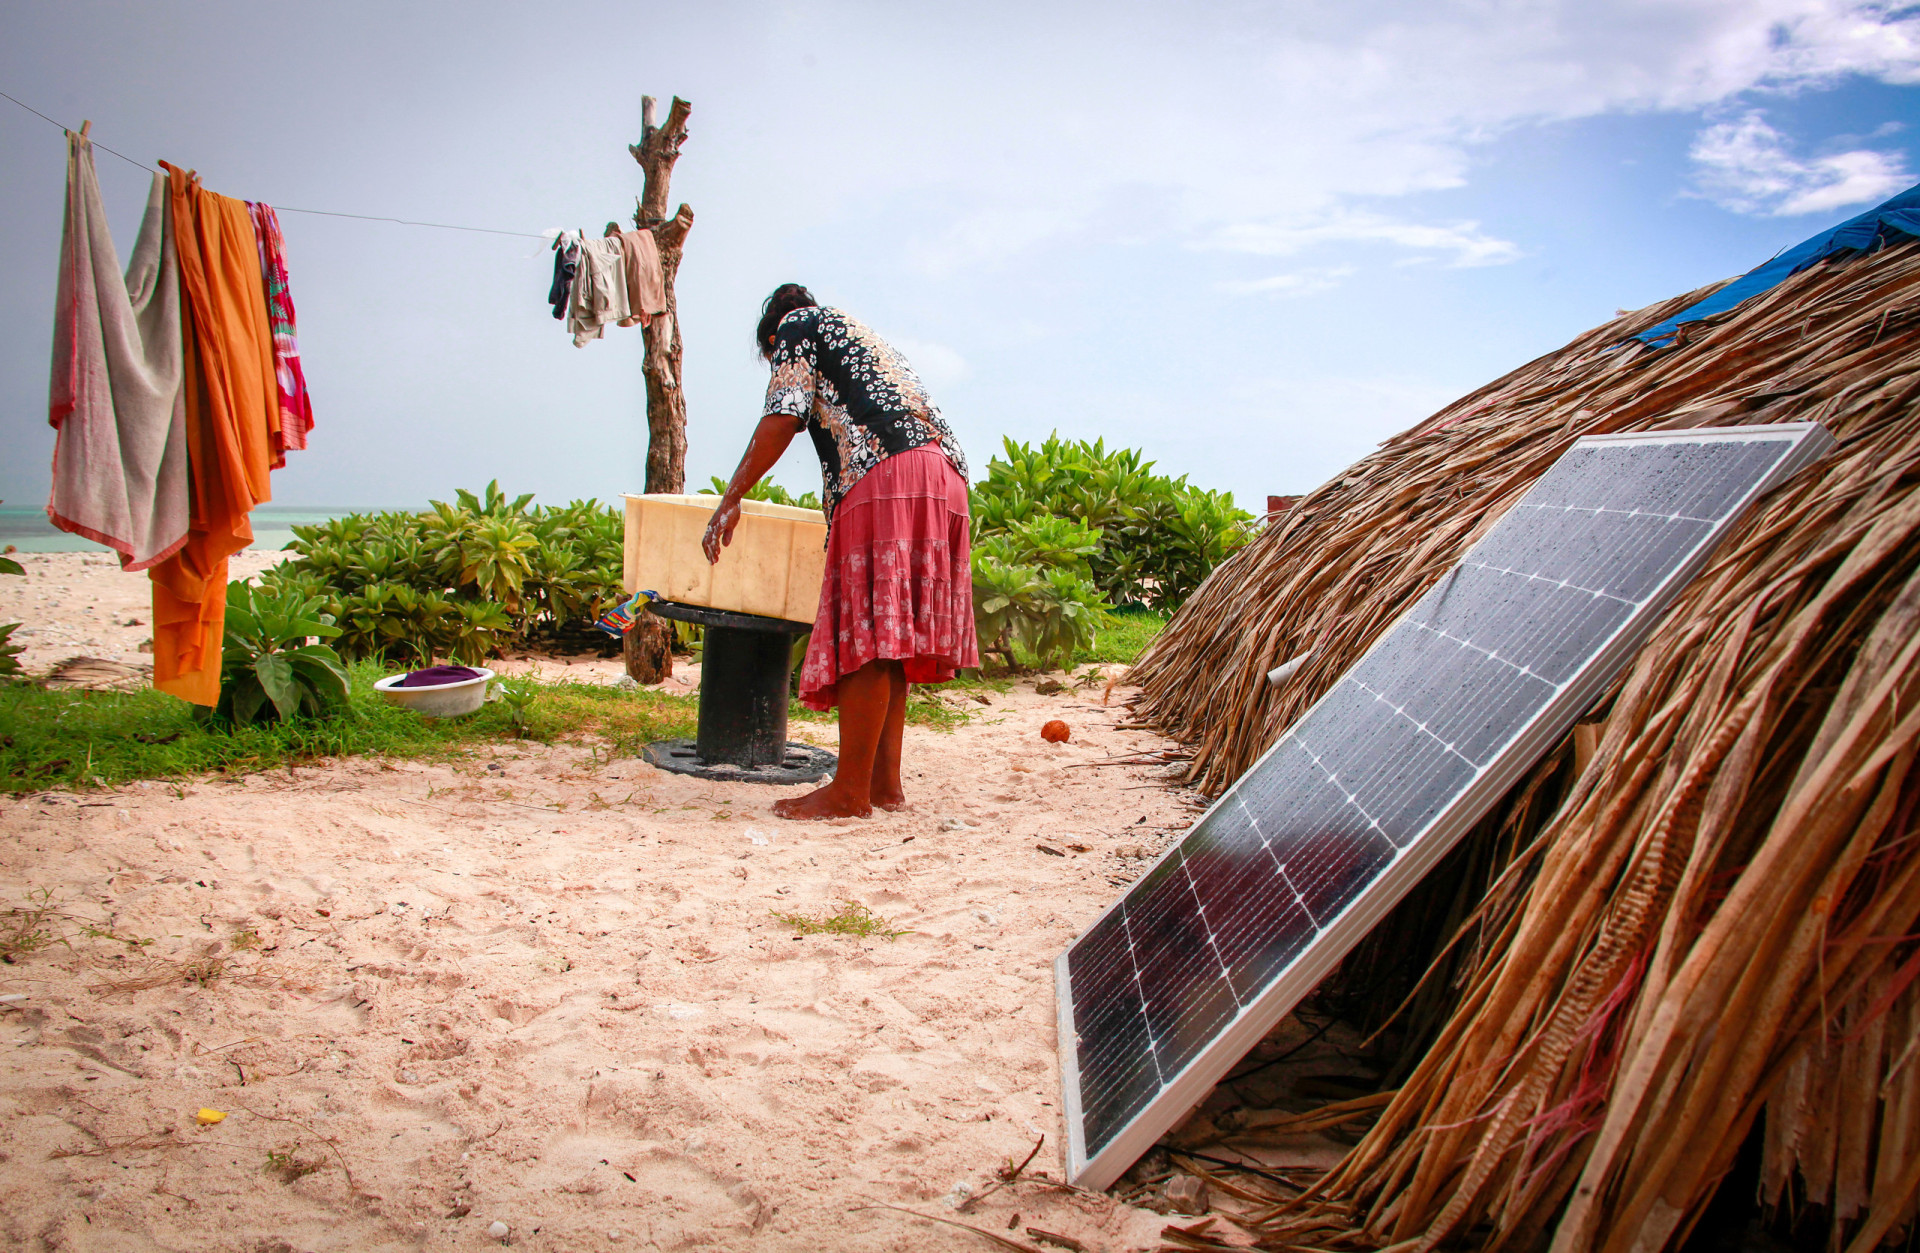 <p>As a way of addressing major environmental concerns, Kiribati is investing in renewable energy sources (such as solar power) to reduce reliance on fossil fuels, all of which are imported and have effects on the country’s economy and wildlife.</p><p>You may also like:<a href="https://www.starsinsider.com/n/183038?utm_source=msn.com&utm_medium=display&utm_campaign=referral_description&utm_content=717375en-us"> The 30 busiest airports in the world</a></p>